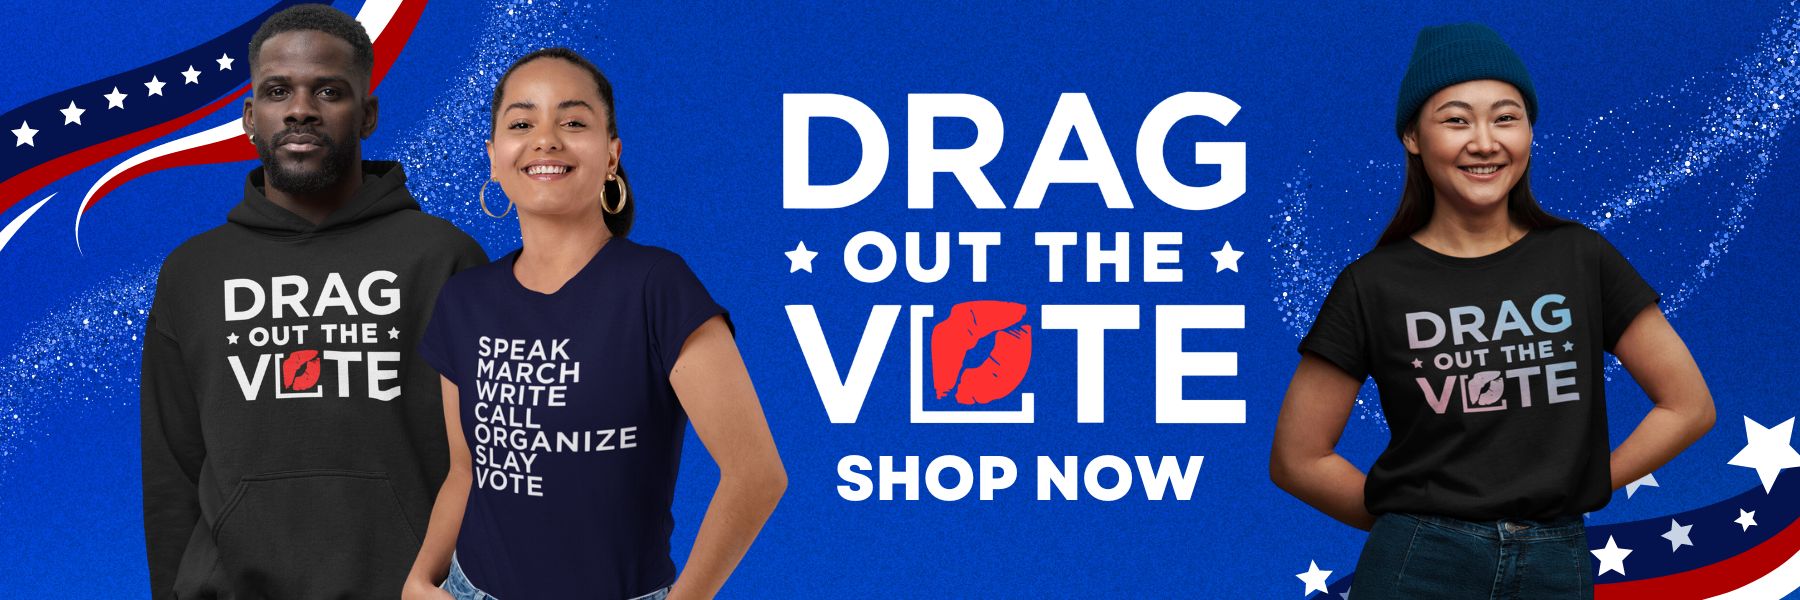 DRAG OUT THE VOTE